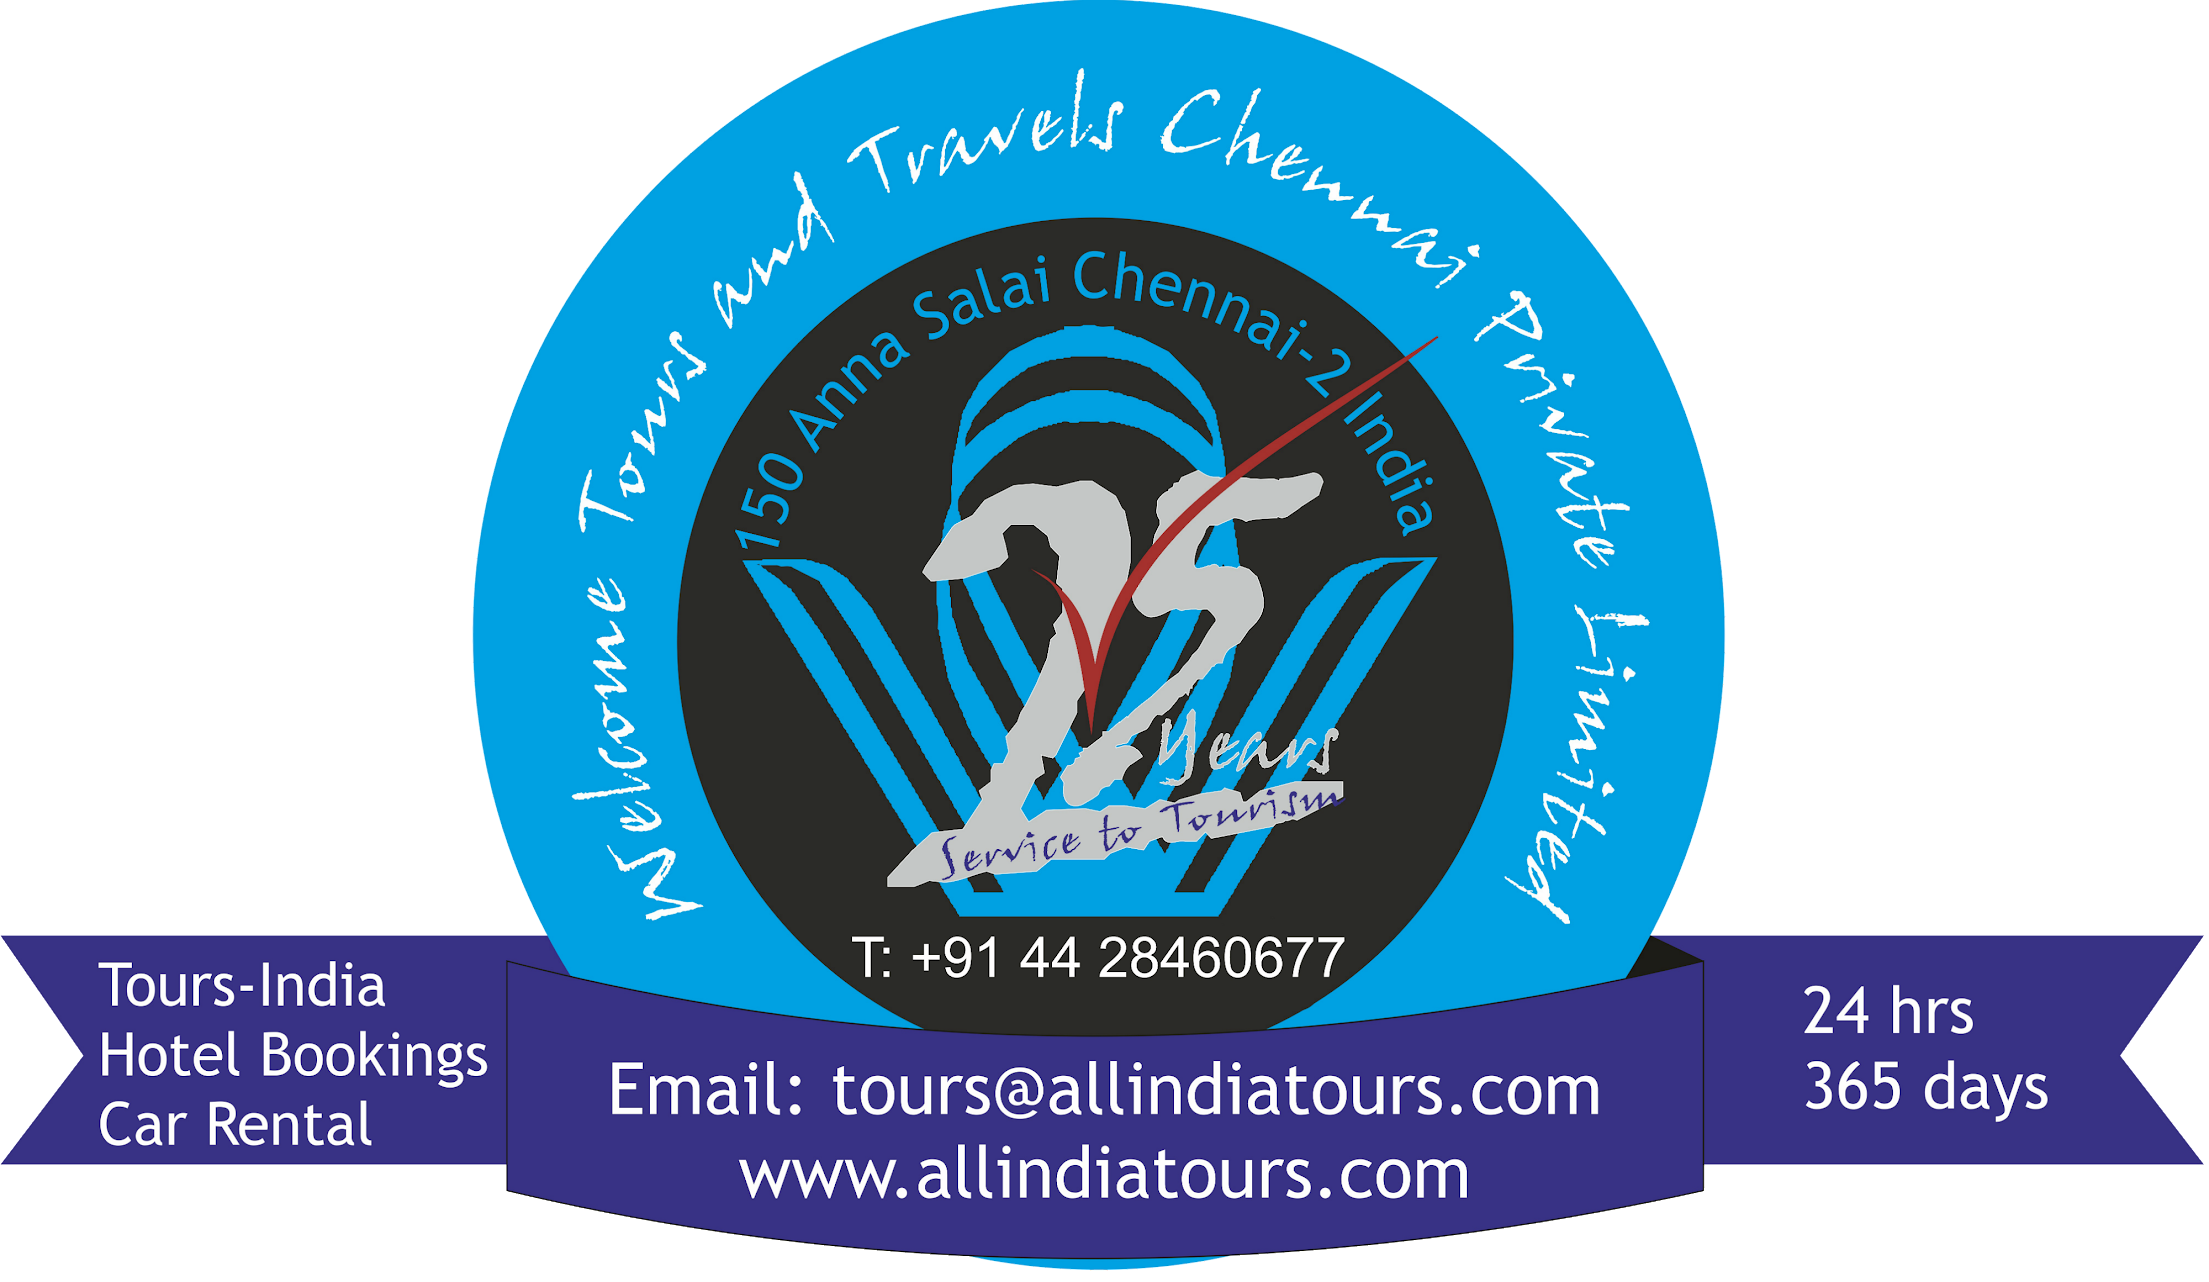 Welcome Tours and Travels Chennai Pvt Ltd